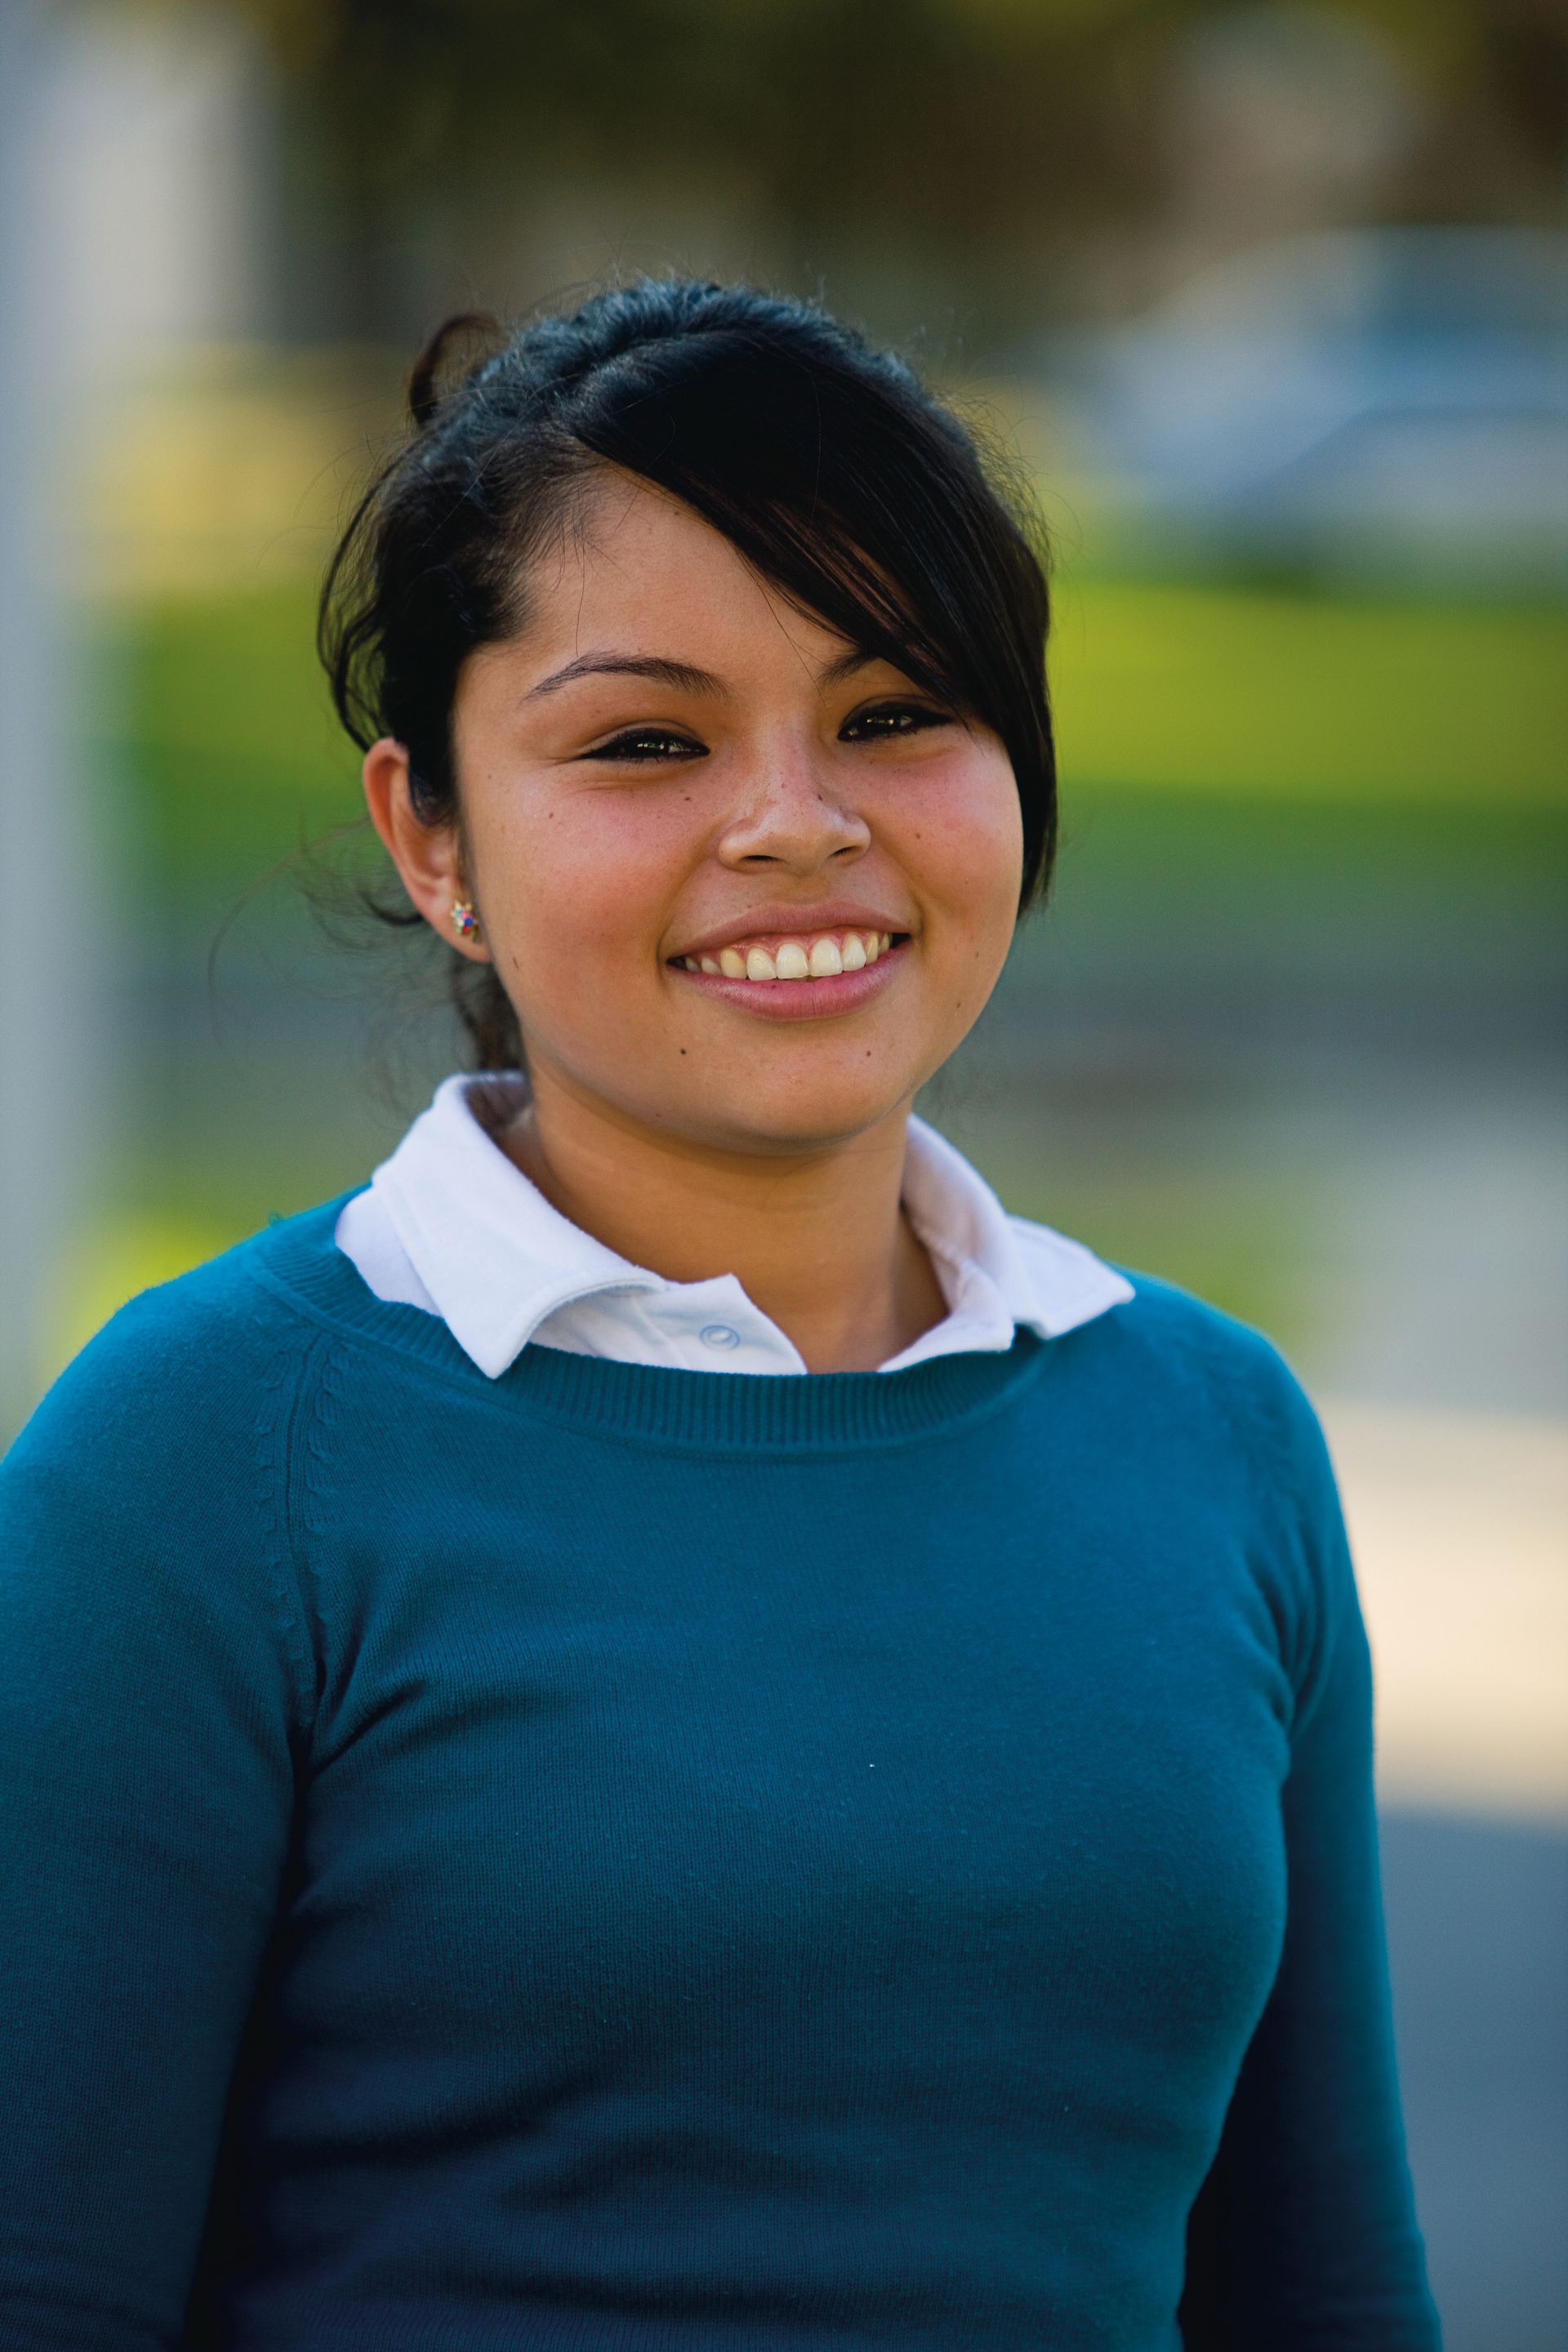 A portrait of a young woman in Mexico smiling.